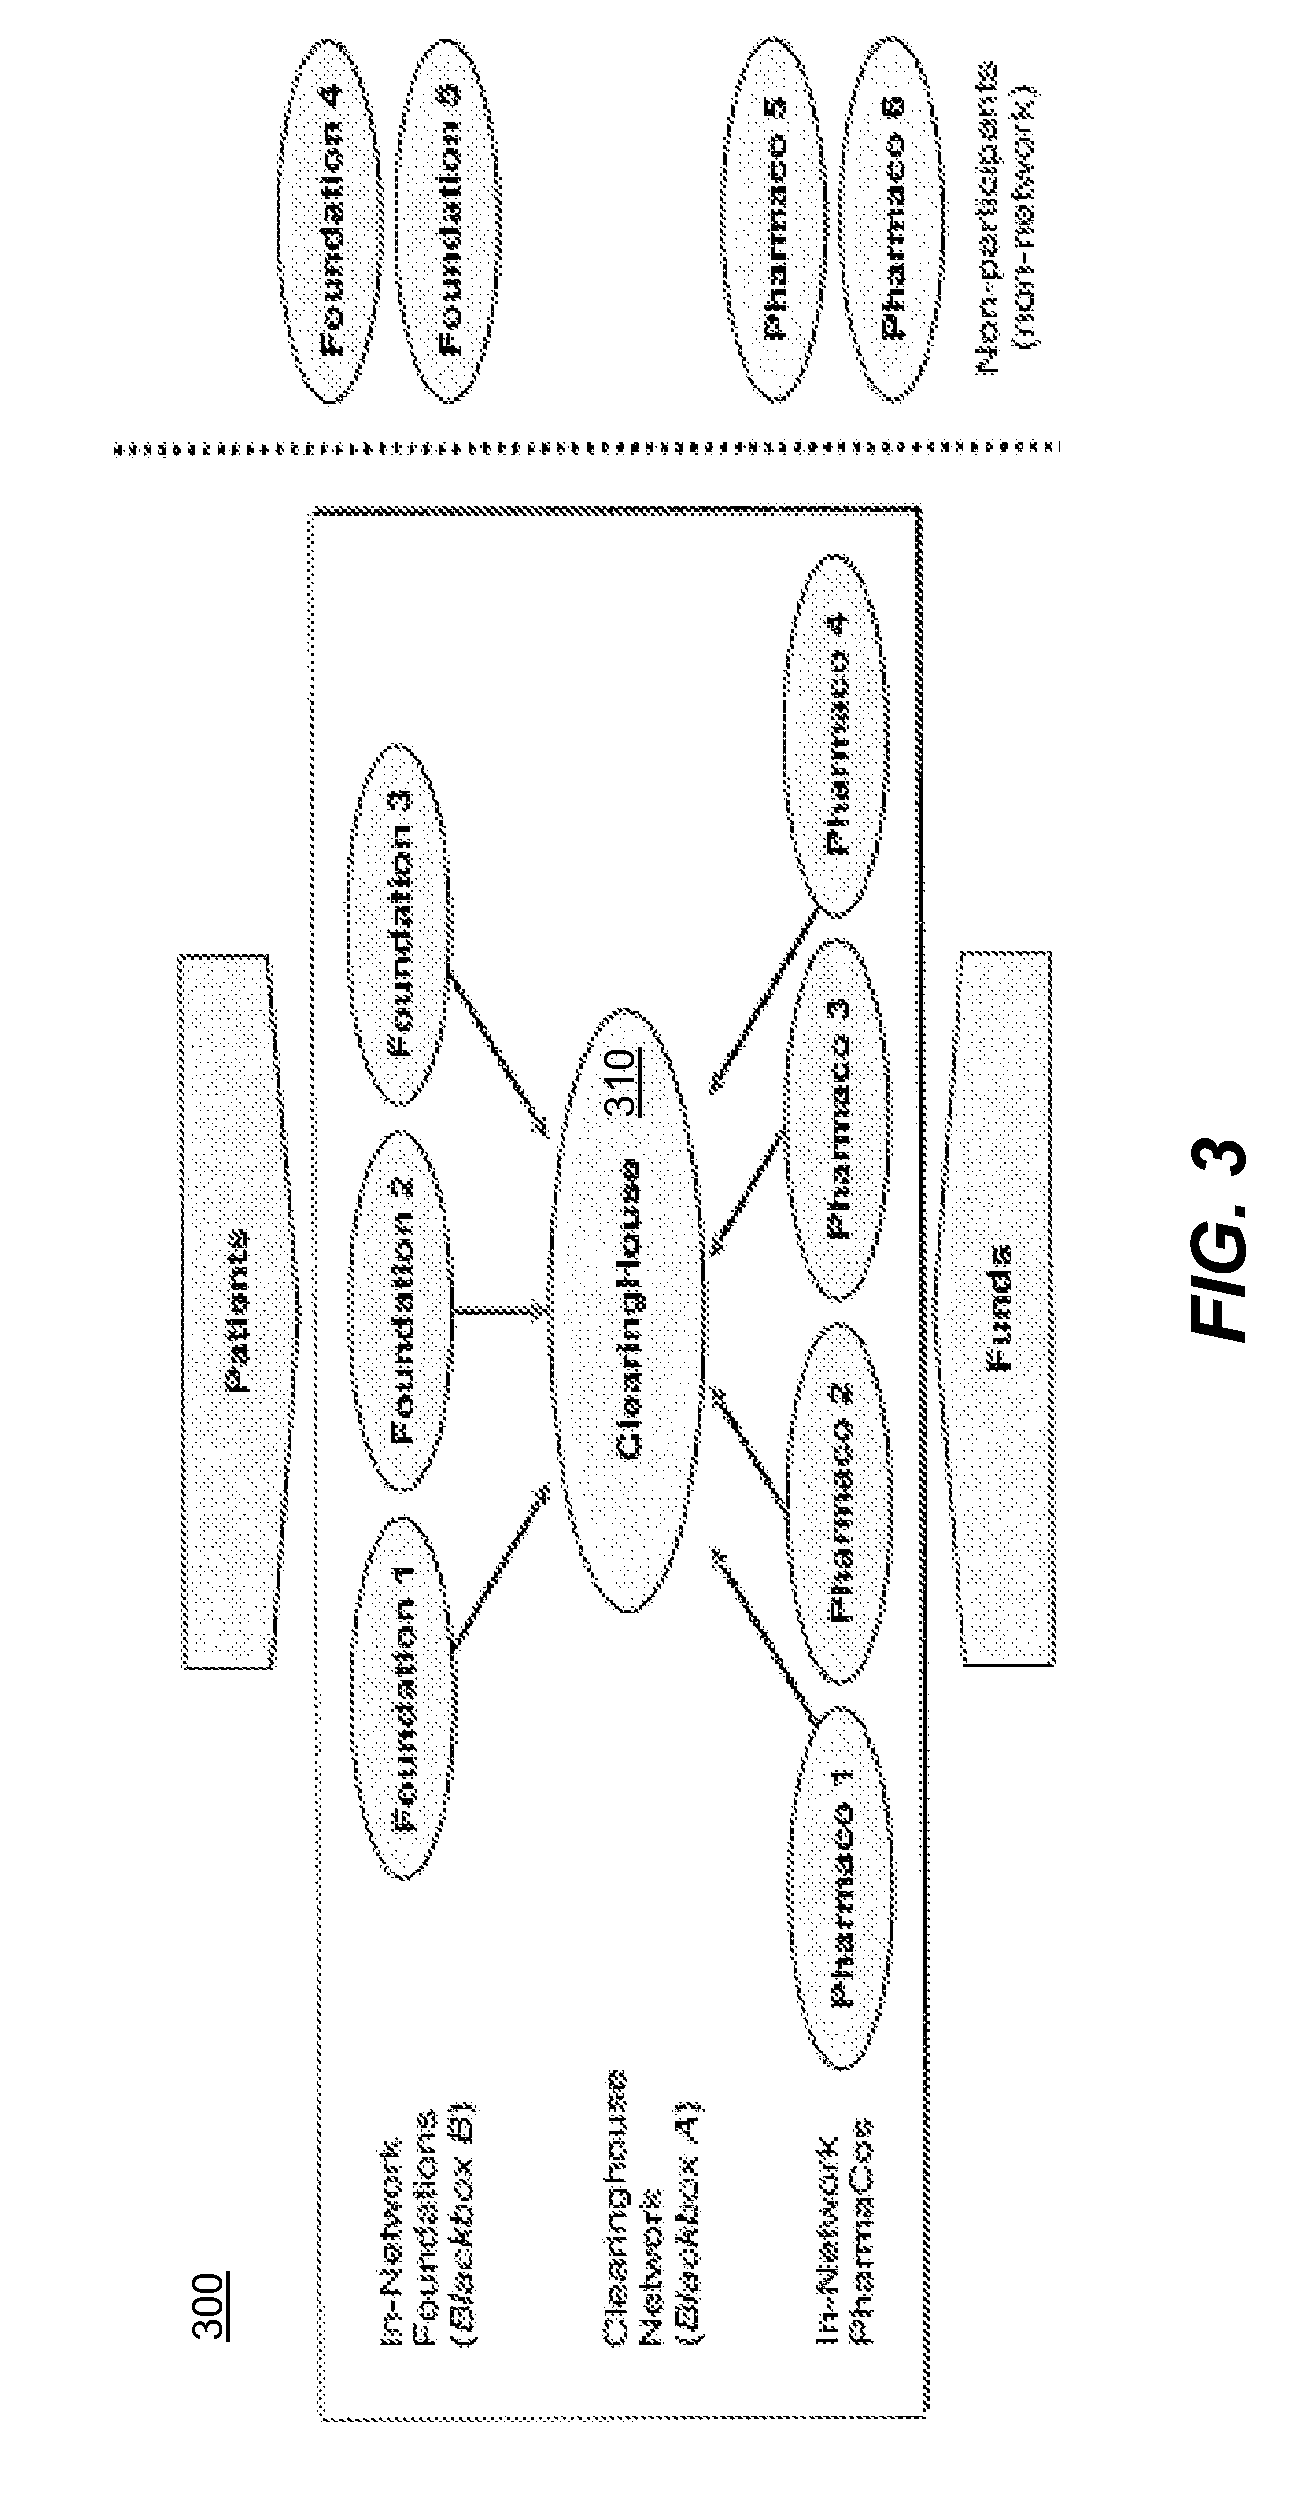 Pharmaceutical clearinghouse method and system